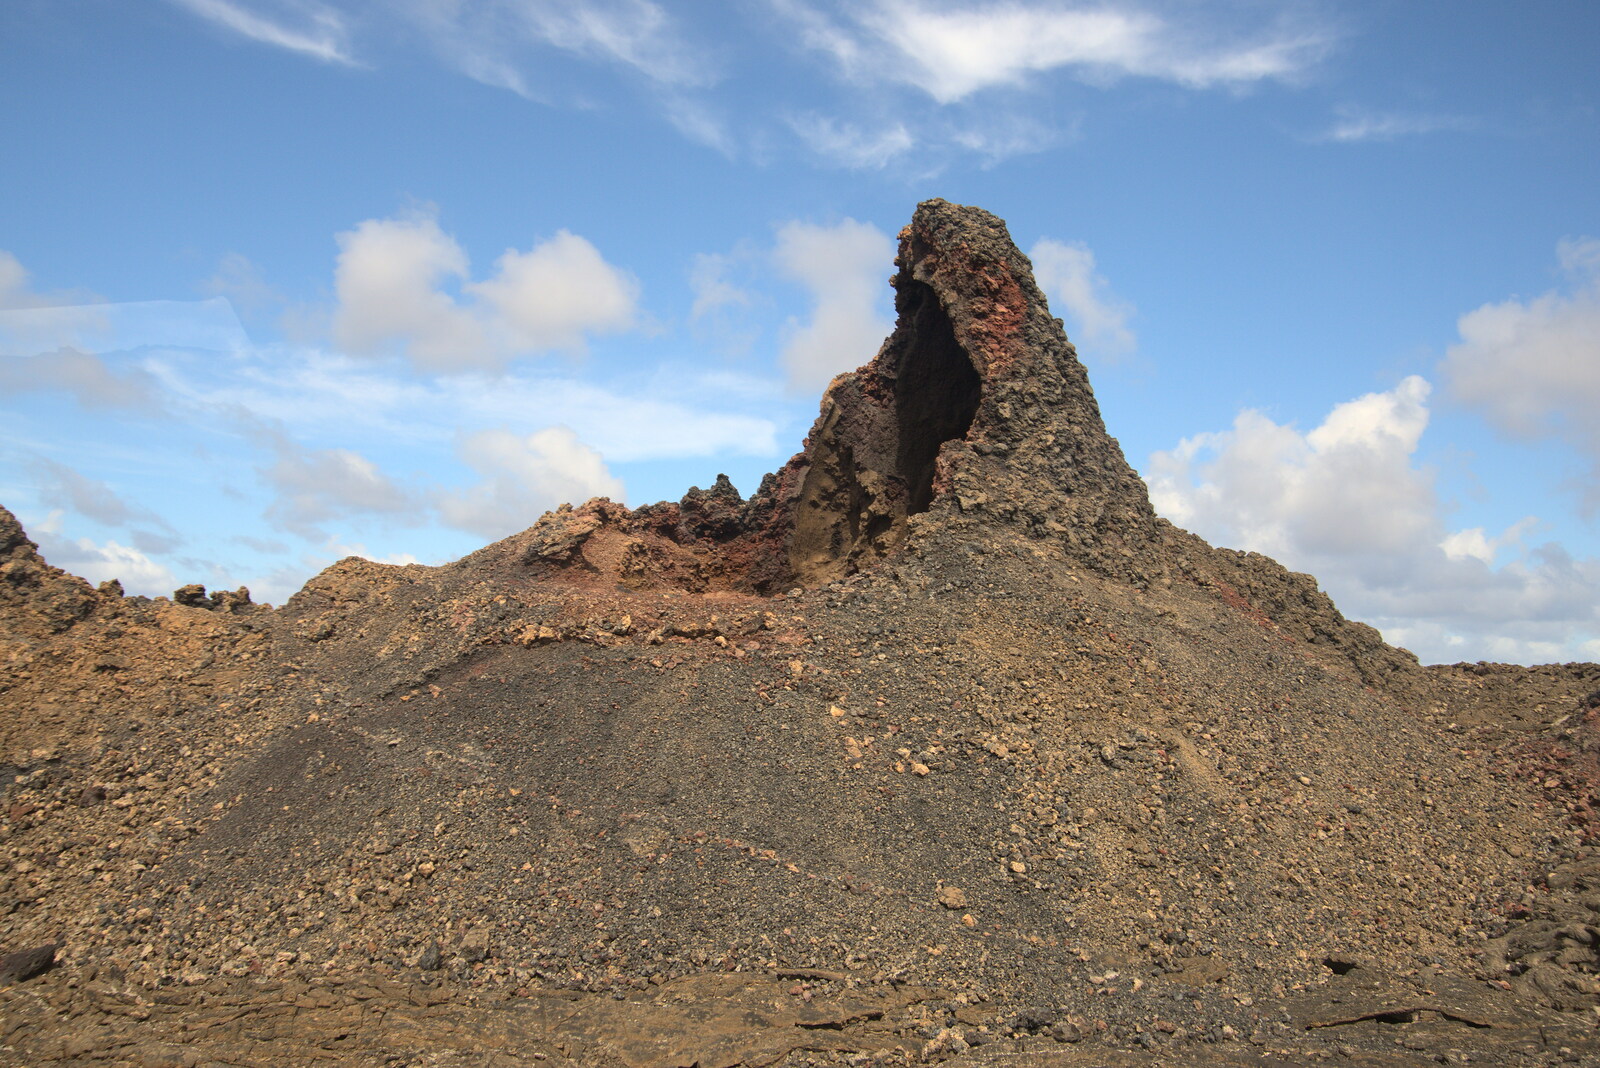 Some kind of volcanic structure from The Volcanoes of Lanzarote, Canary Islands, Spain - 27th October 2021